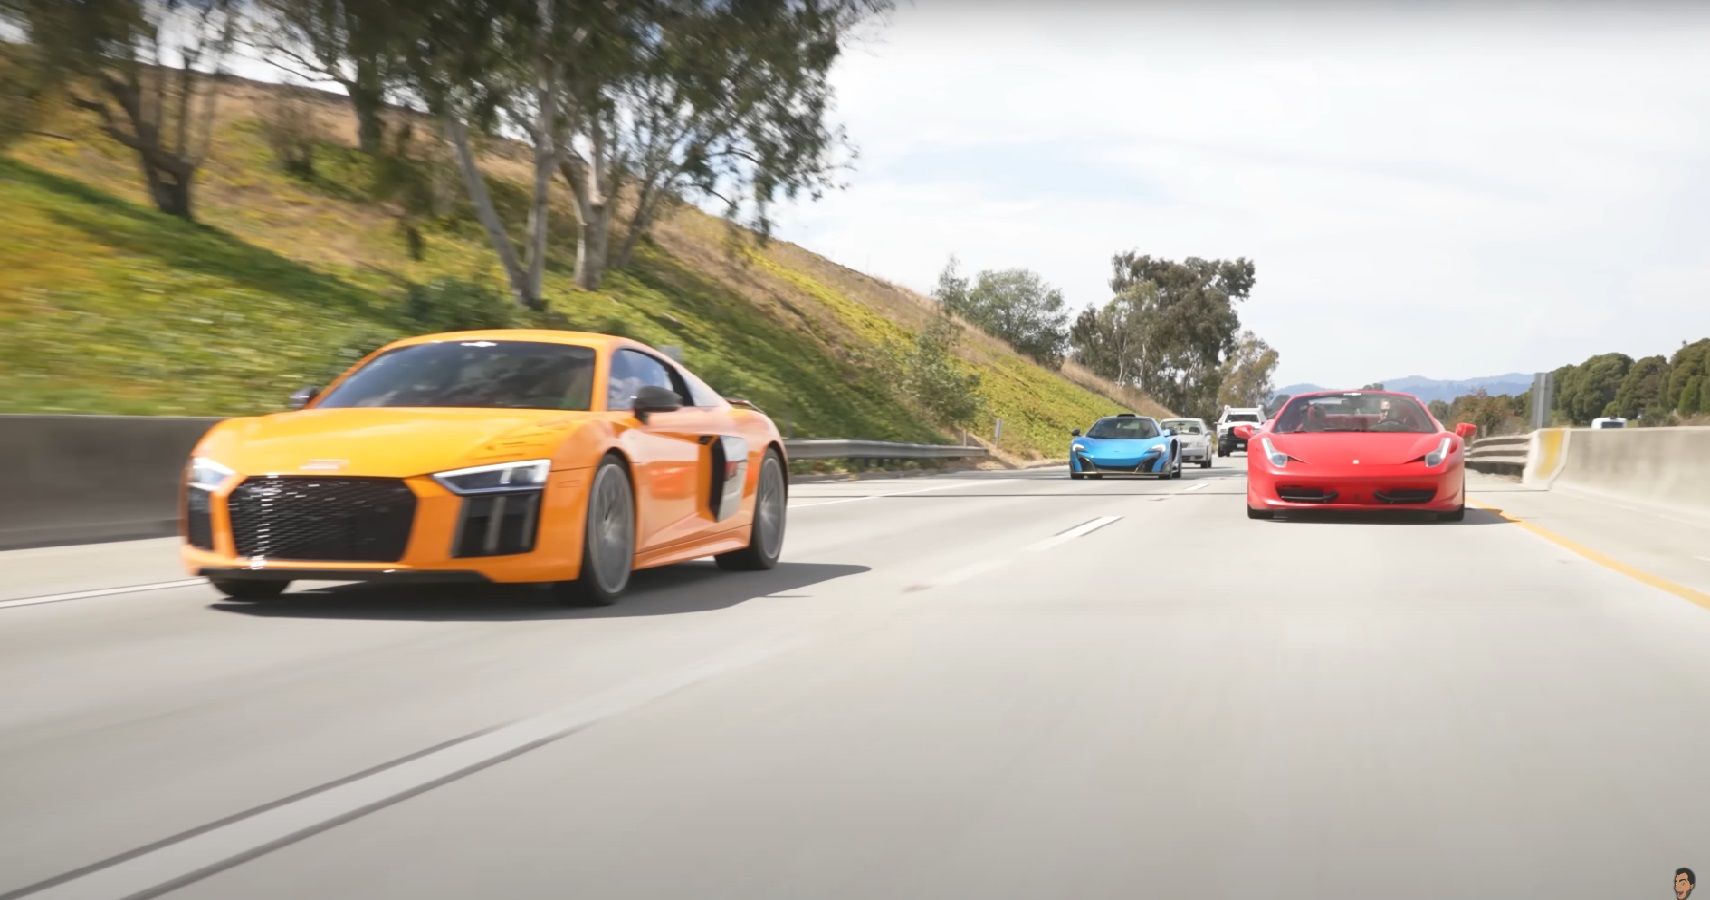 Trading Half A Million Dollars Worth Of Supercars With Strangers